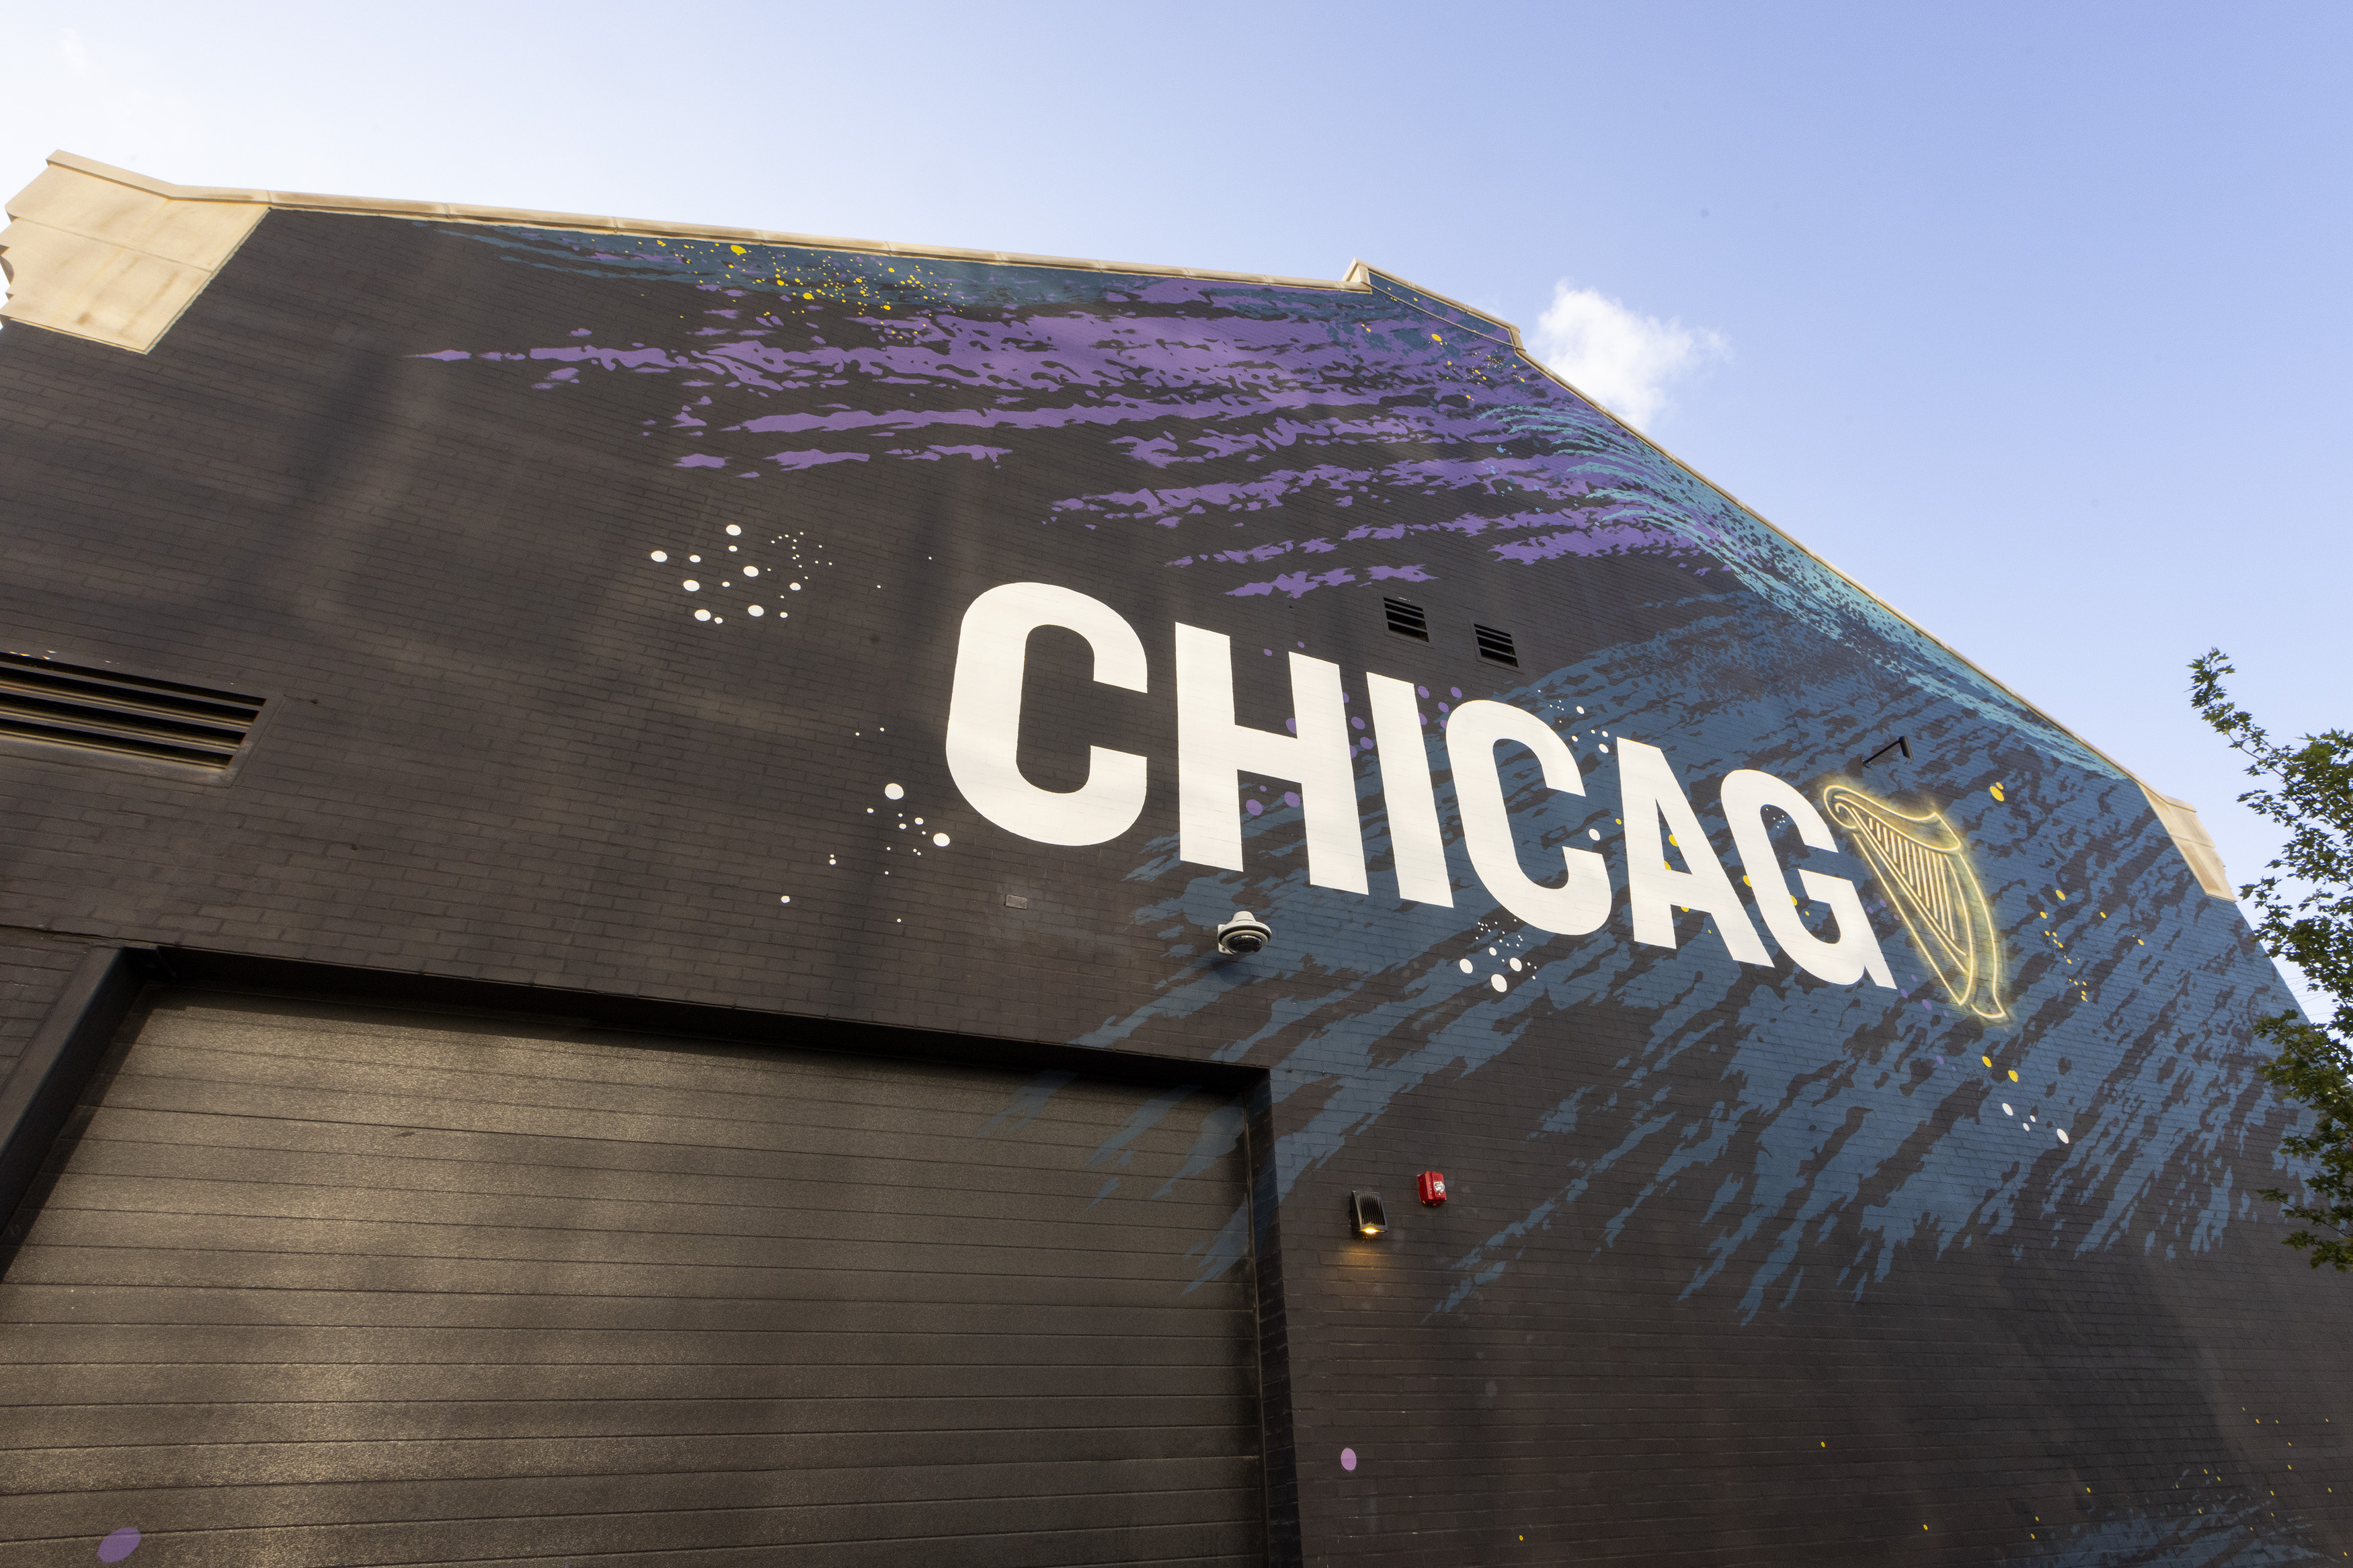 A large building with the letters “CHICAGO” stenciled in white. The “O” is replaced with a harp.